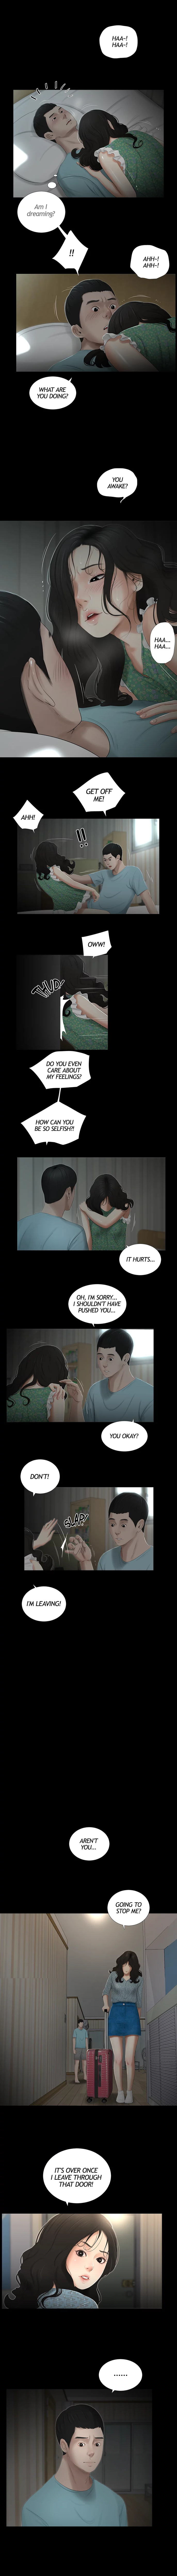 Friends With Secrets - Chapter 17 Page 2